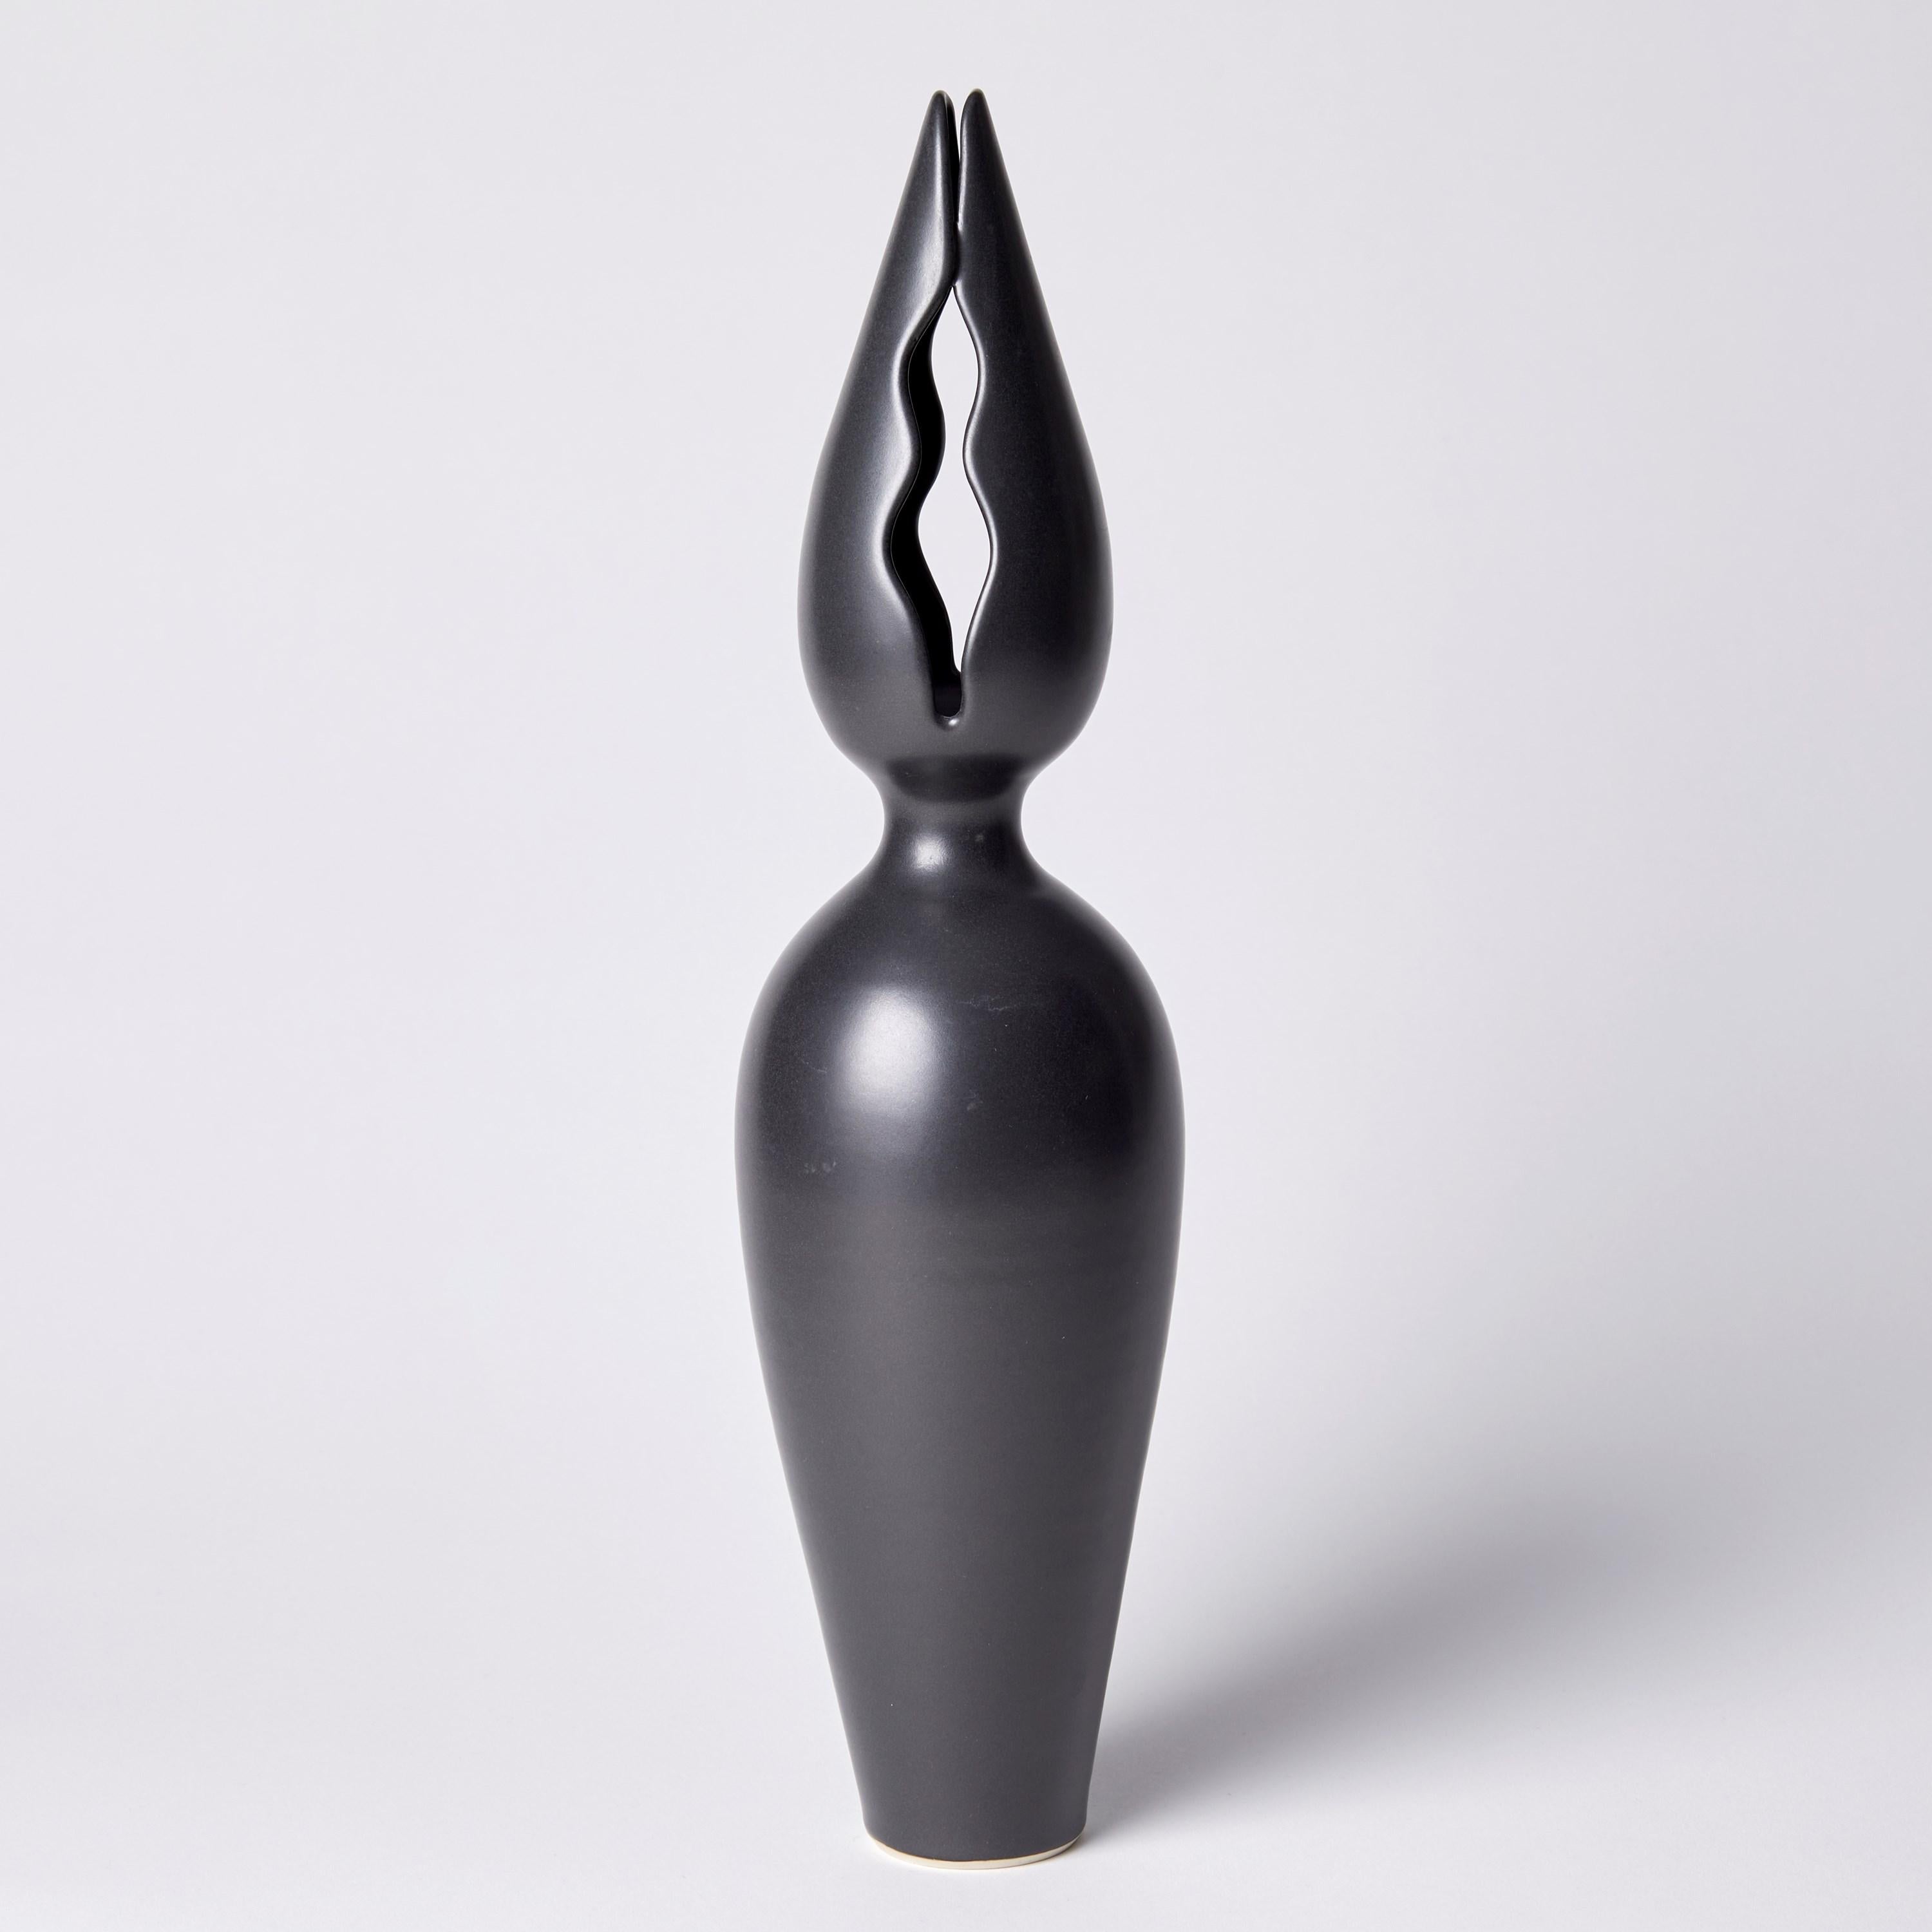 ‘Tall Lily Vase’ is a unique porcelain sculptural vessel by the British artist, Vivienne Foley, which has been released from her own personal archive of artworks. 

Vivienne Foley is based in Gloucestershire where she produces exquisite ceramic